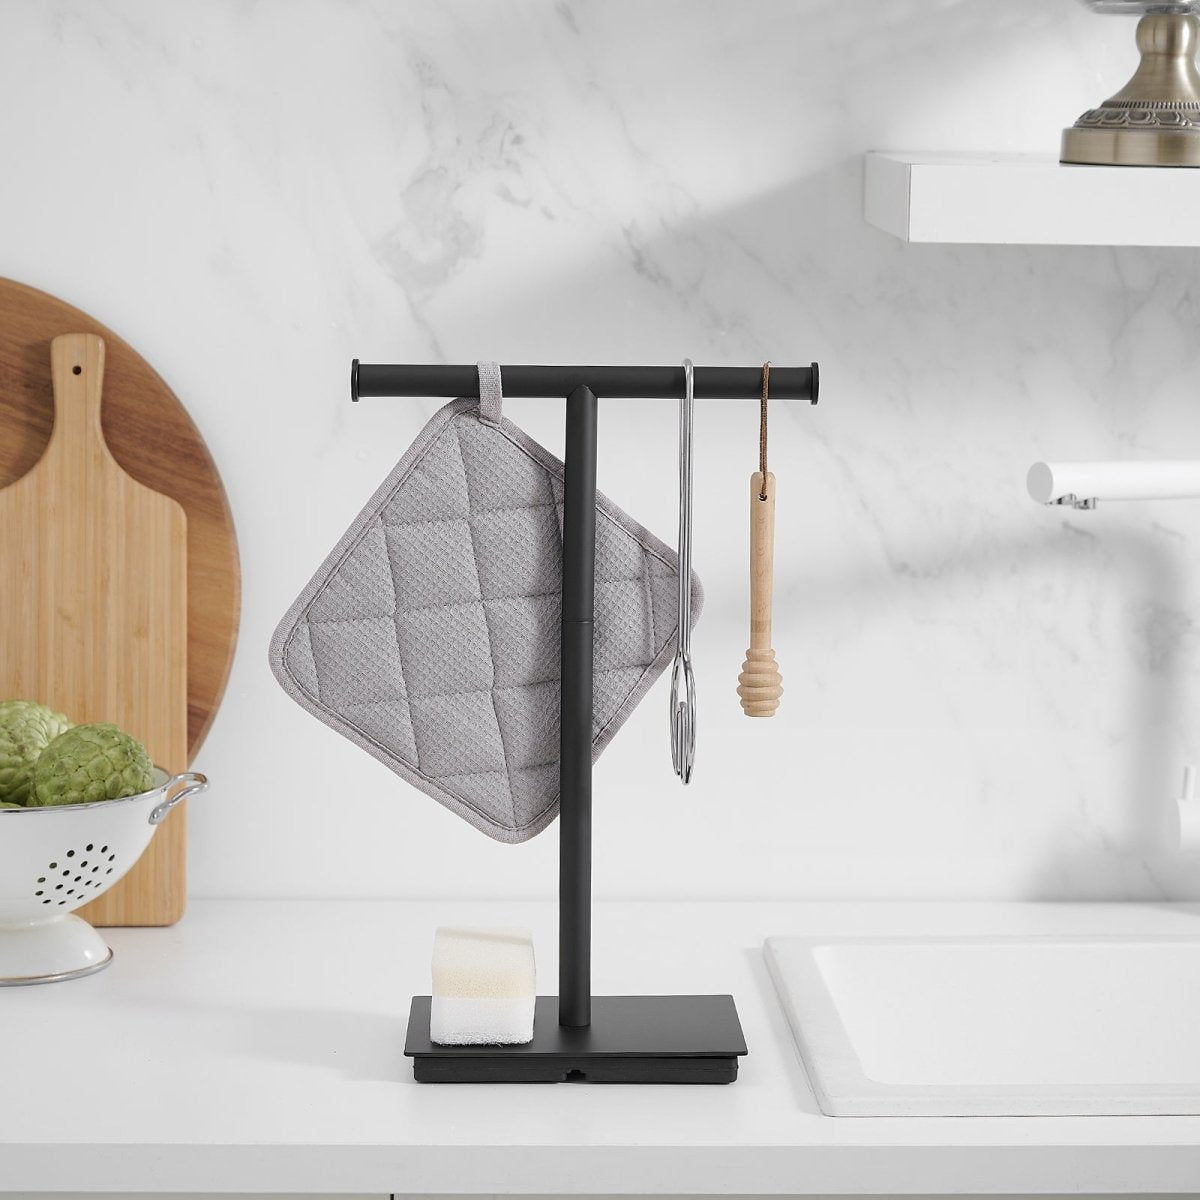 Toilet Paper Holder with Steady T-Shape Towel Rack in Black - buyfaucet.com